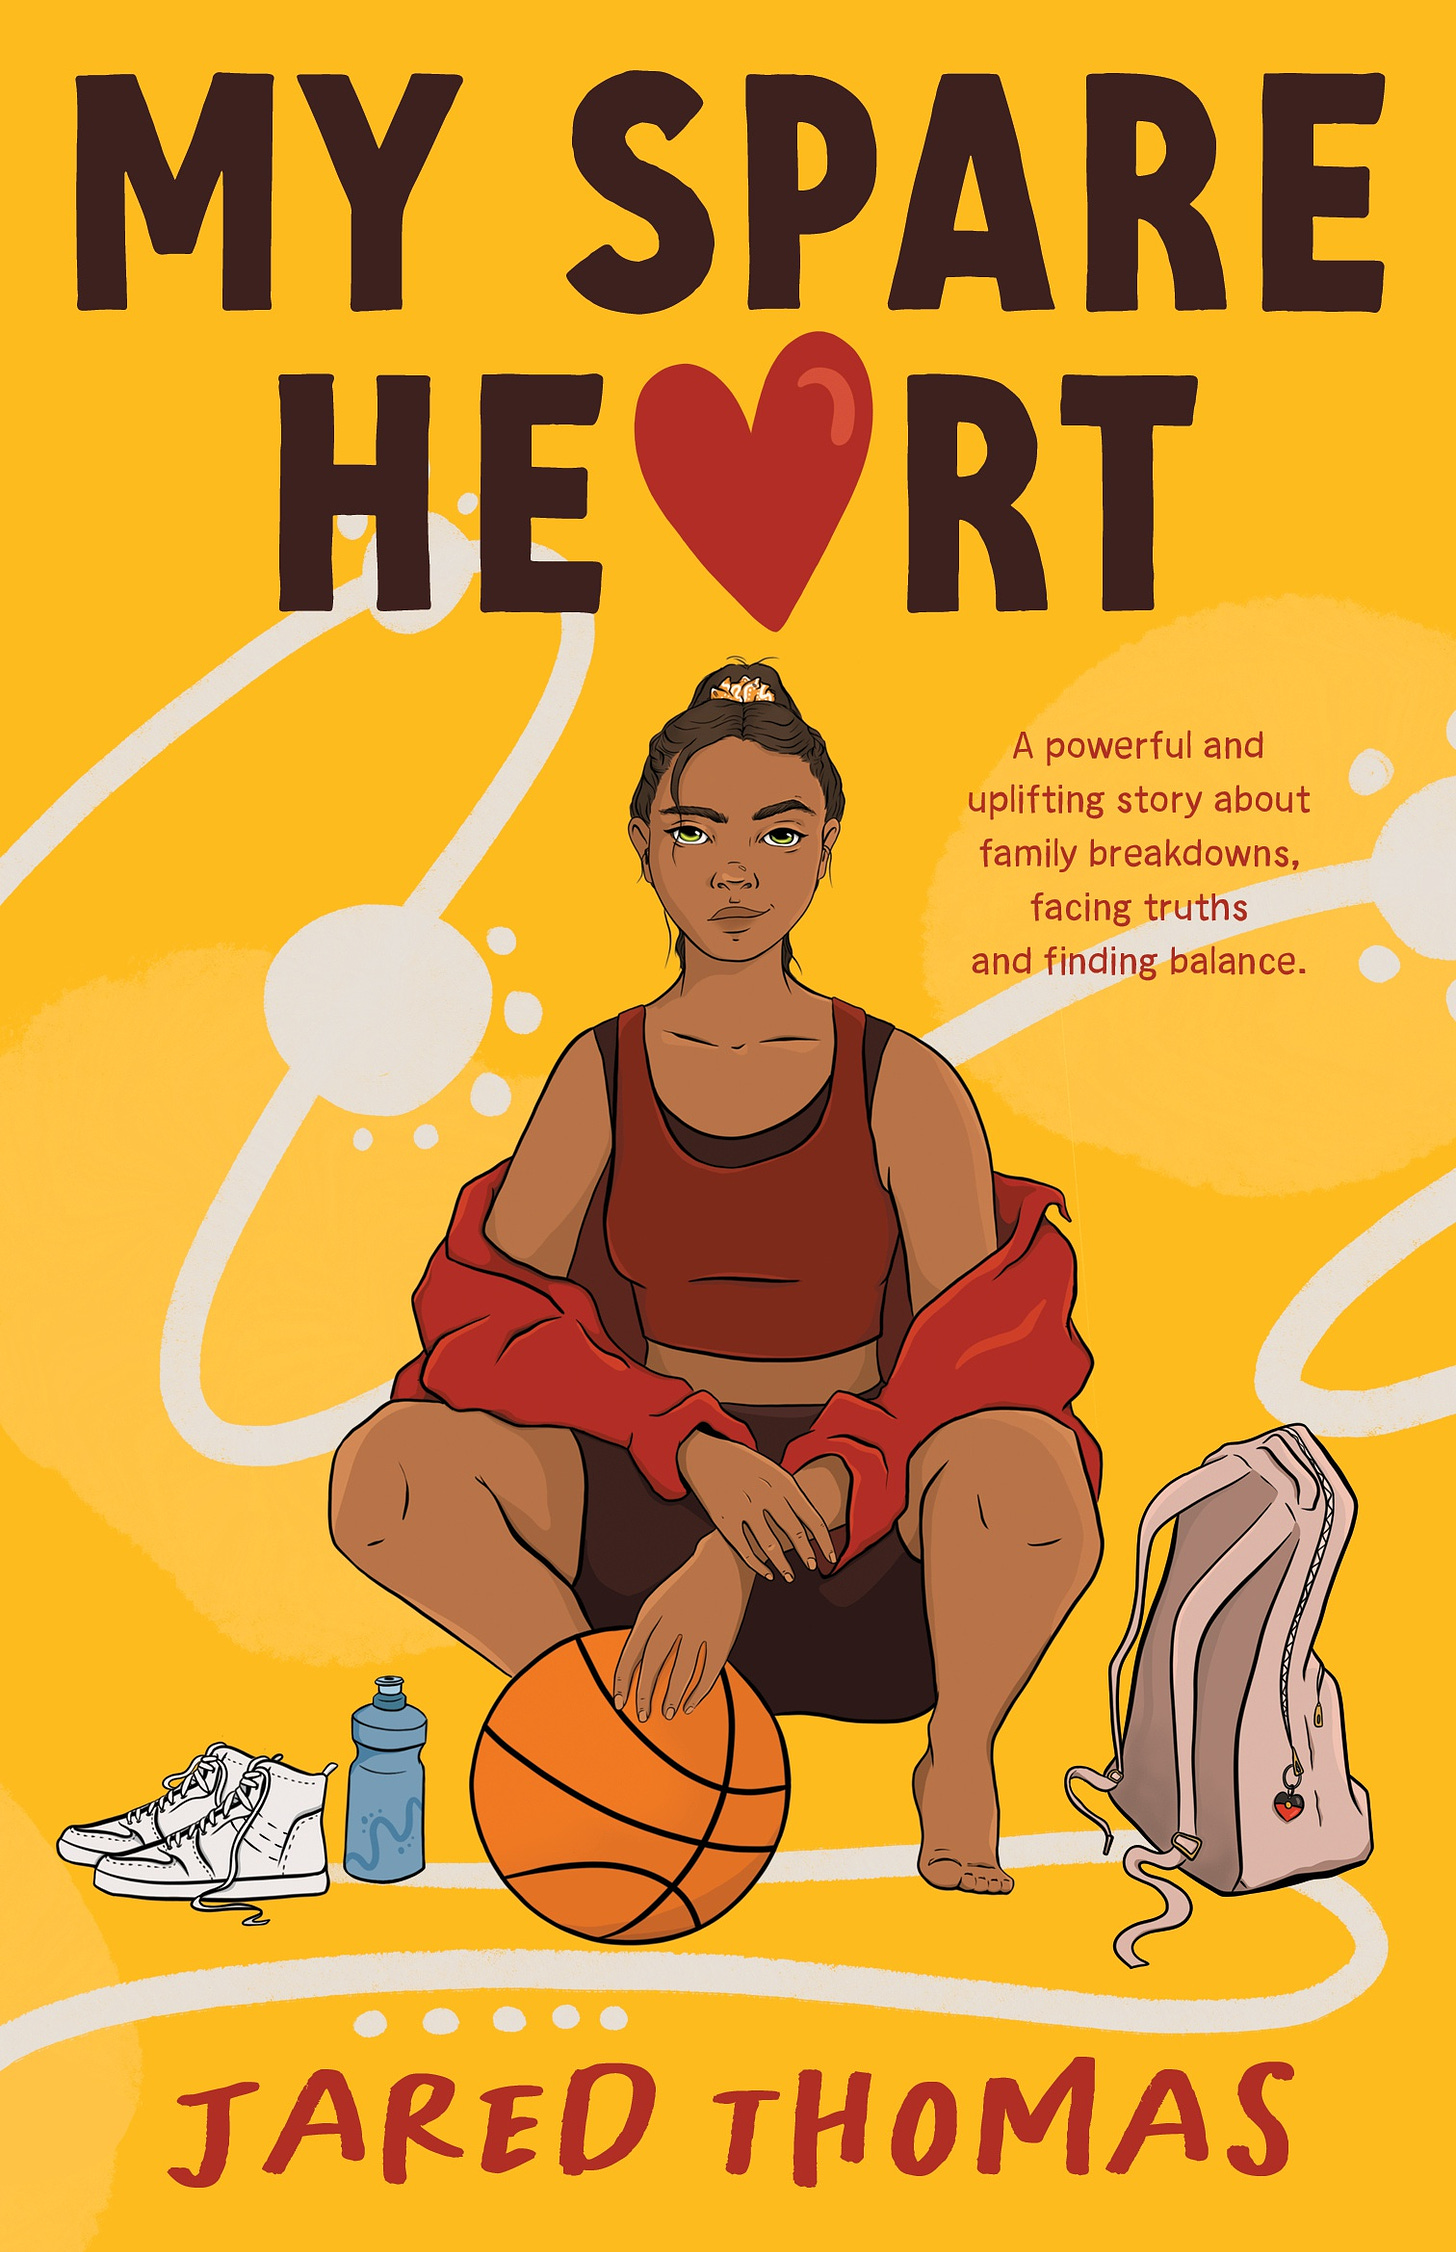 The cover of My Spare Heart by Jared Thomas, which has a young female basketball player on it, with a yellow background